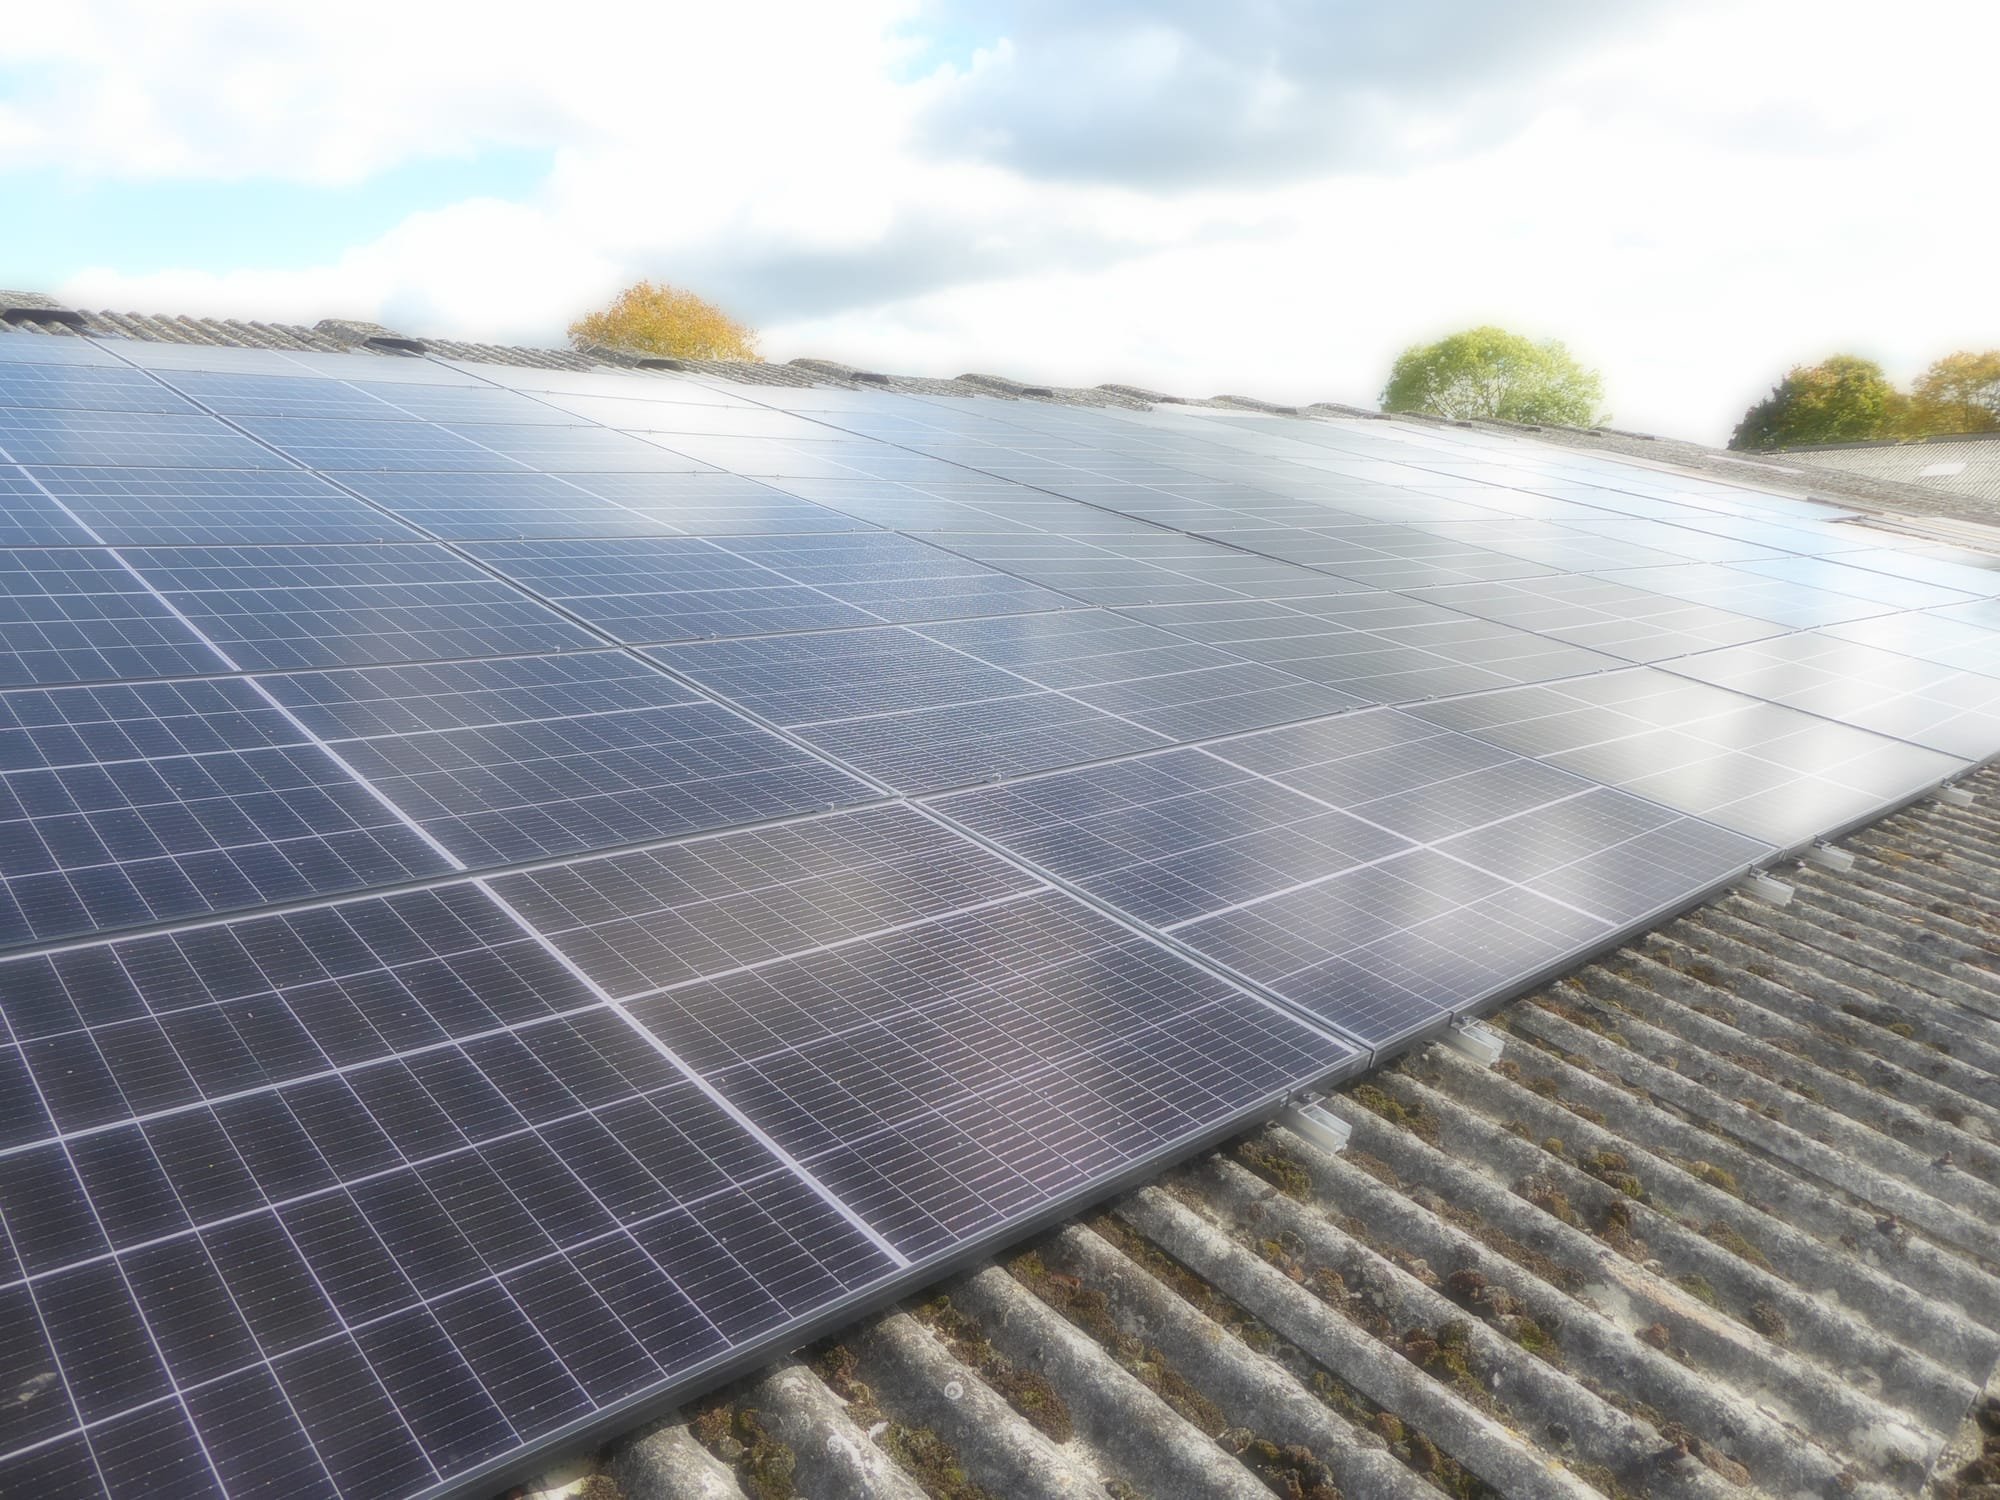 Solar Partner has been appointed to install PV modules on a farm